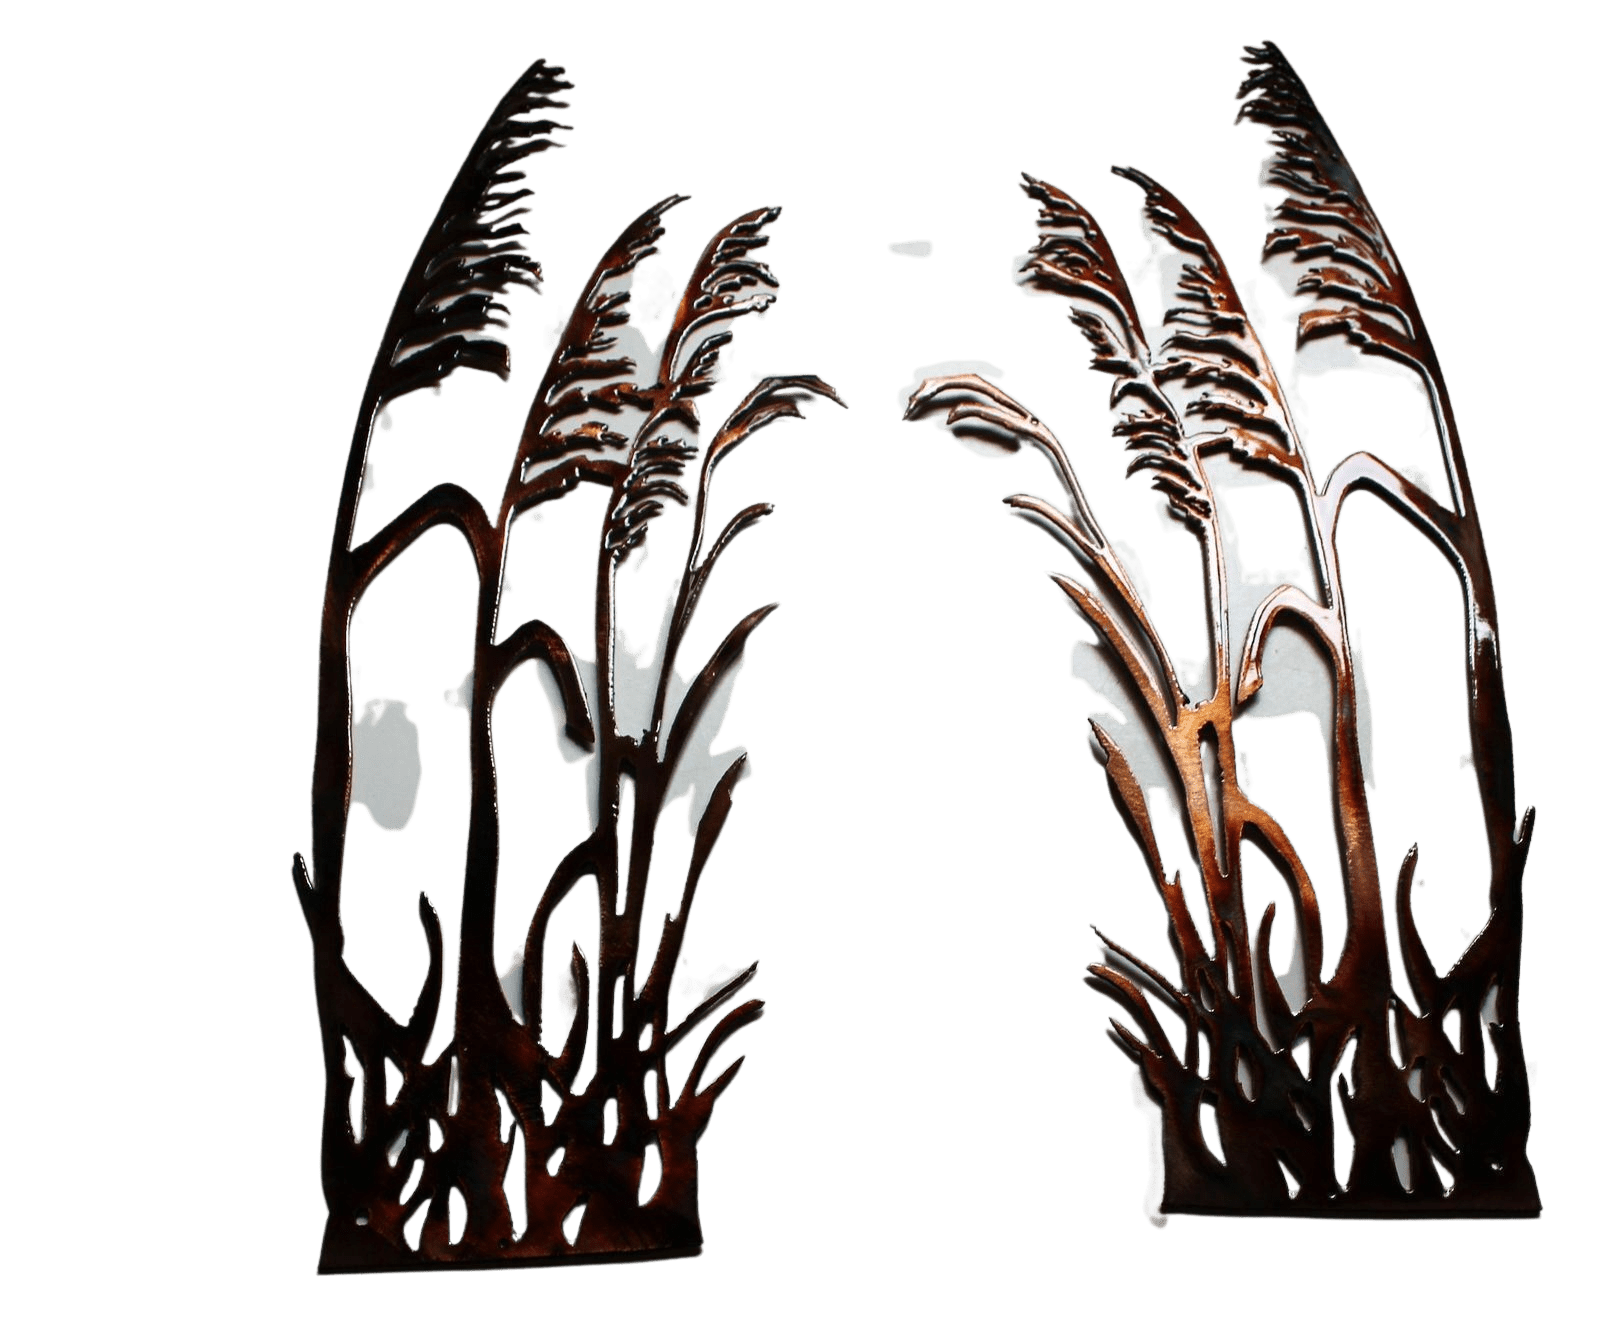 Sea Oats Pair (2 Pieces) - Metal Wall Art - Copper 16 1/4" x 6 1/2" - Home Decor Gifts and More